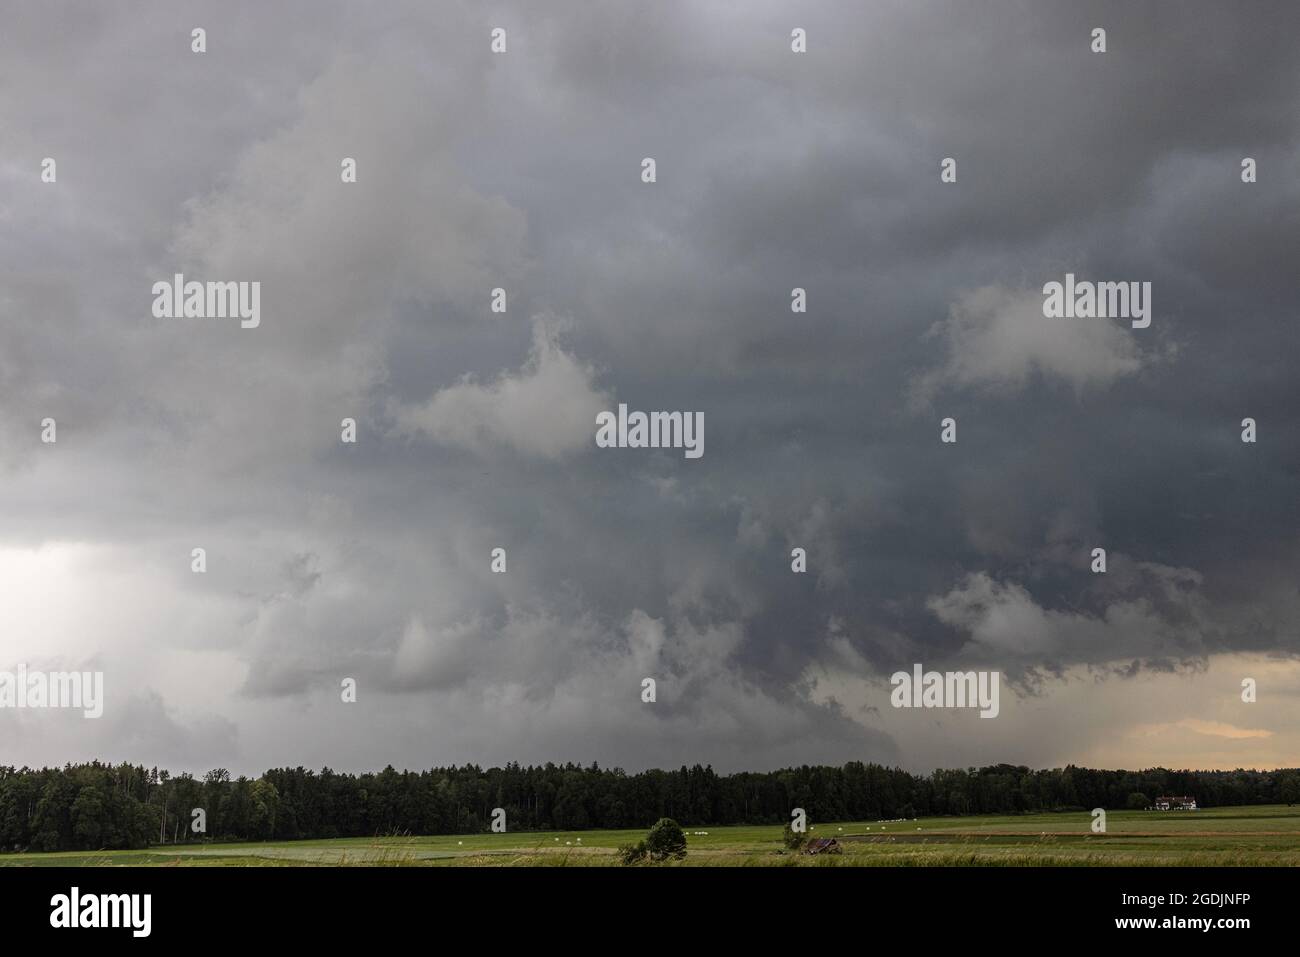 approaching thunderstorm with hale and storm, Germany, Bavaria, Wasserburg Stock Photo